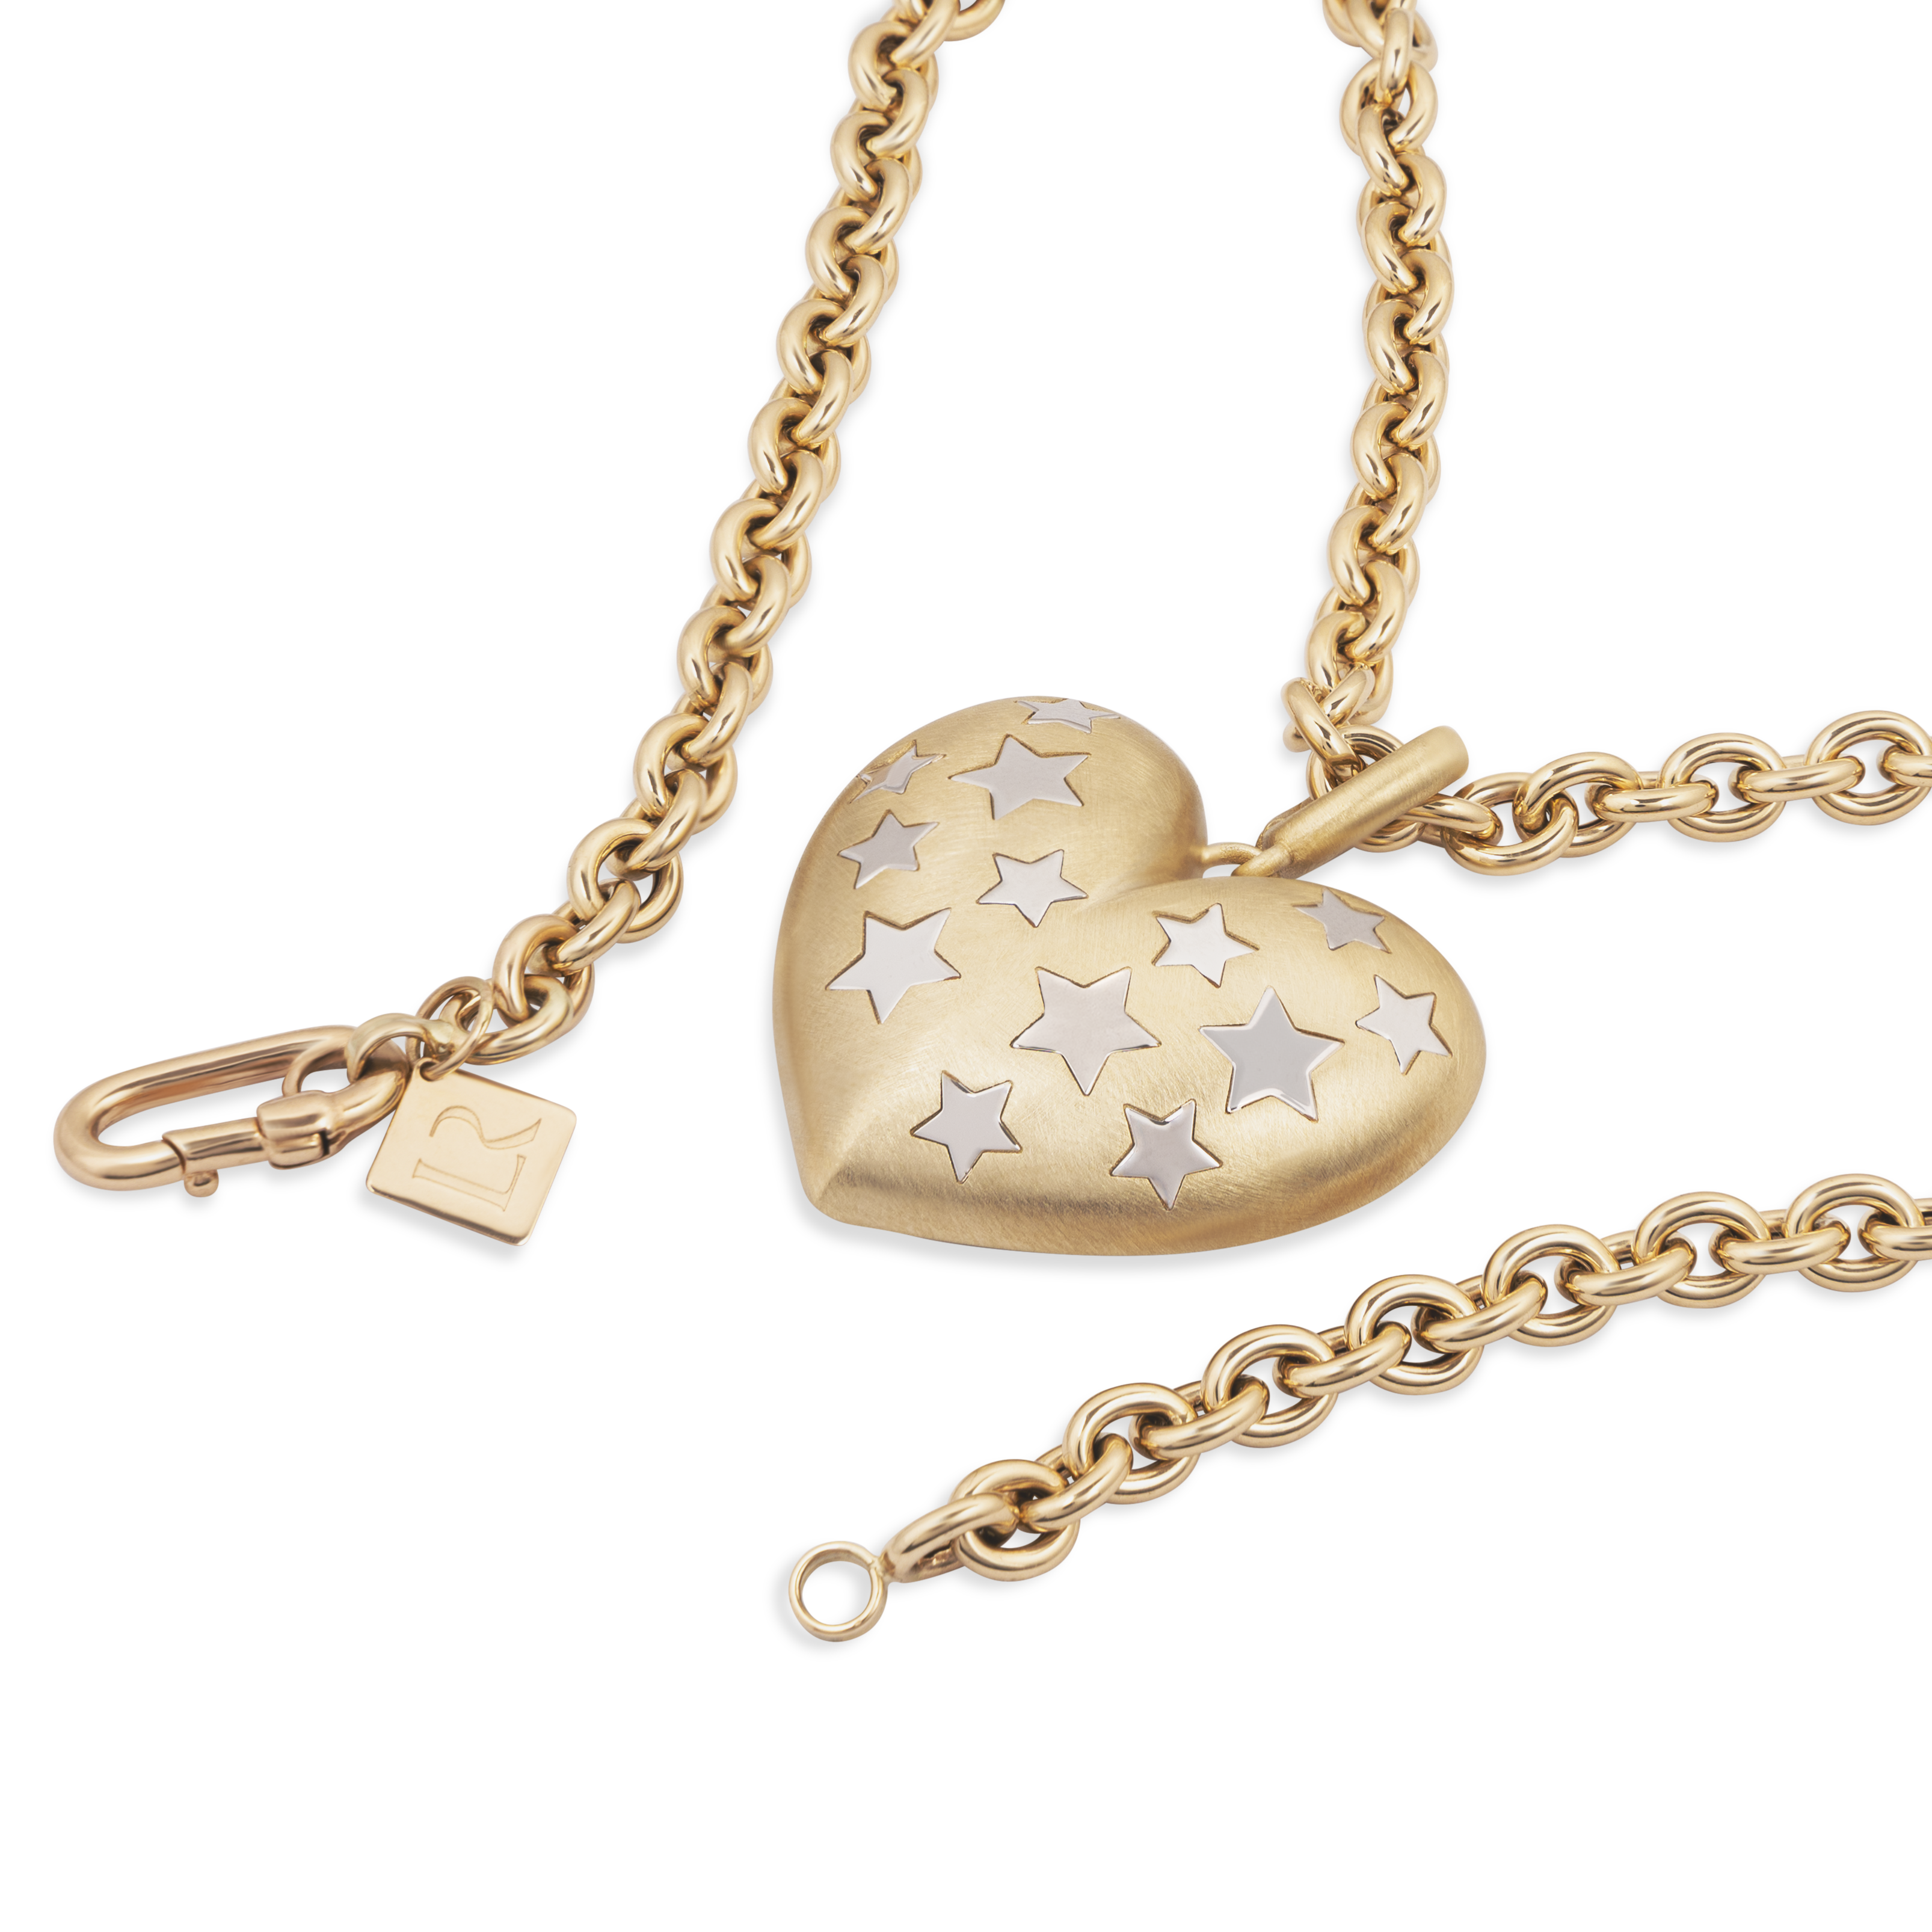 Paulette Brushed Yellow Gold Heart with White Gold Stars Pendant